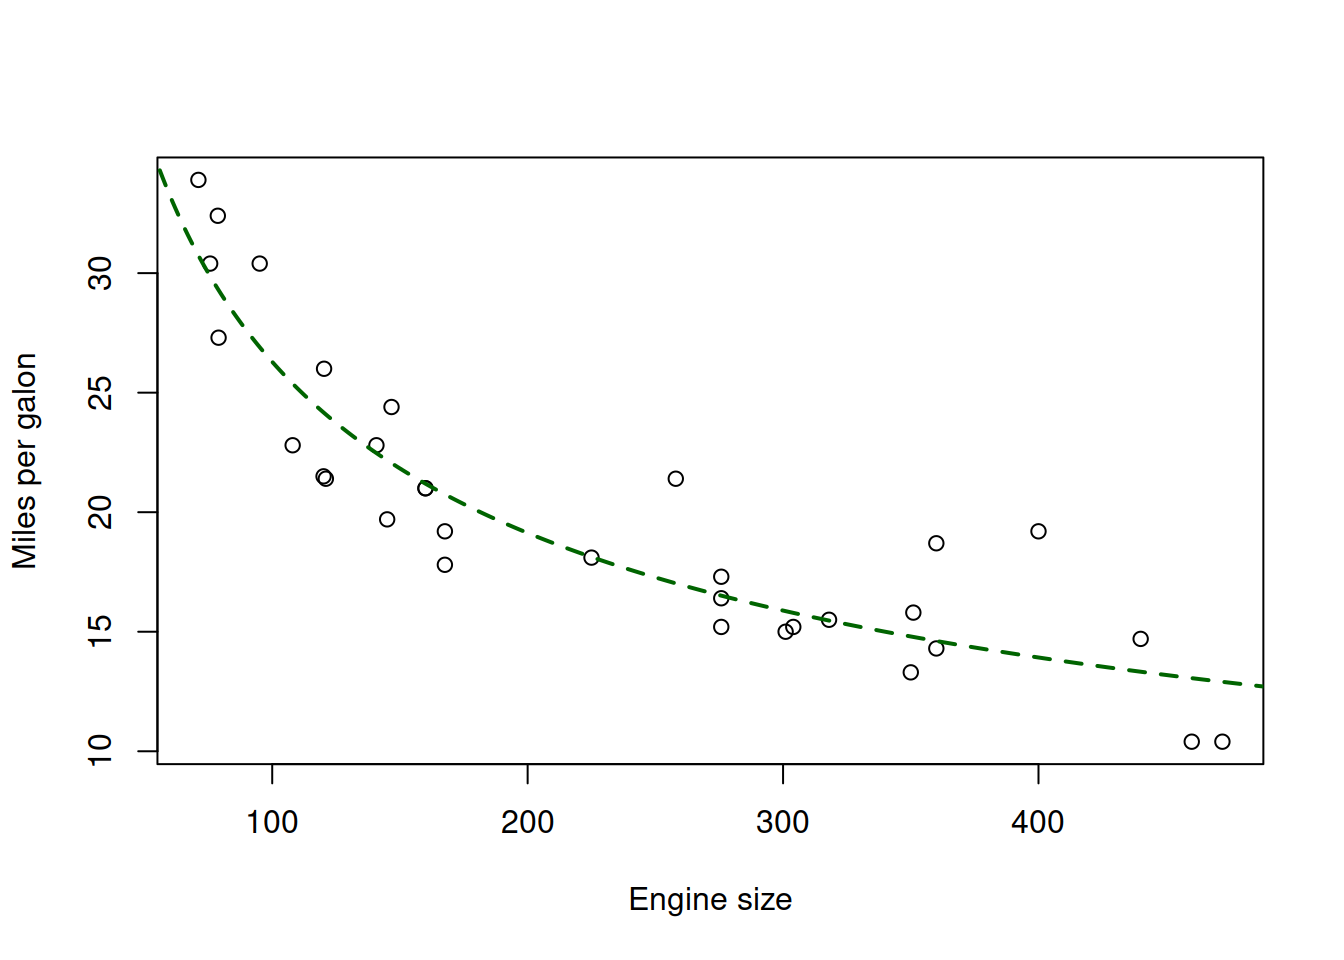 Fuel consumption vs engine size and the true model